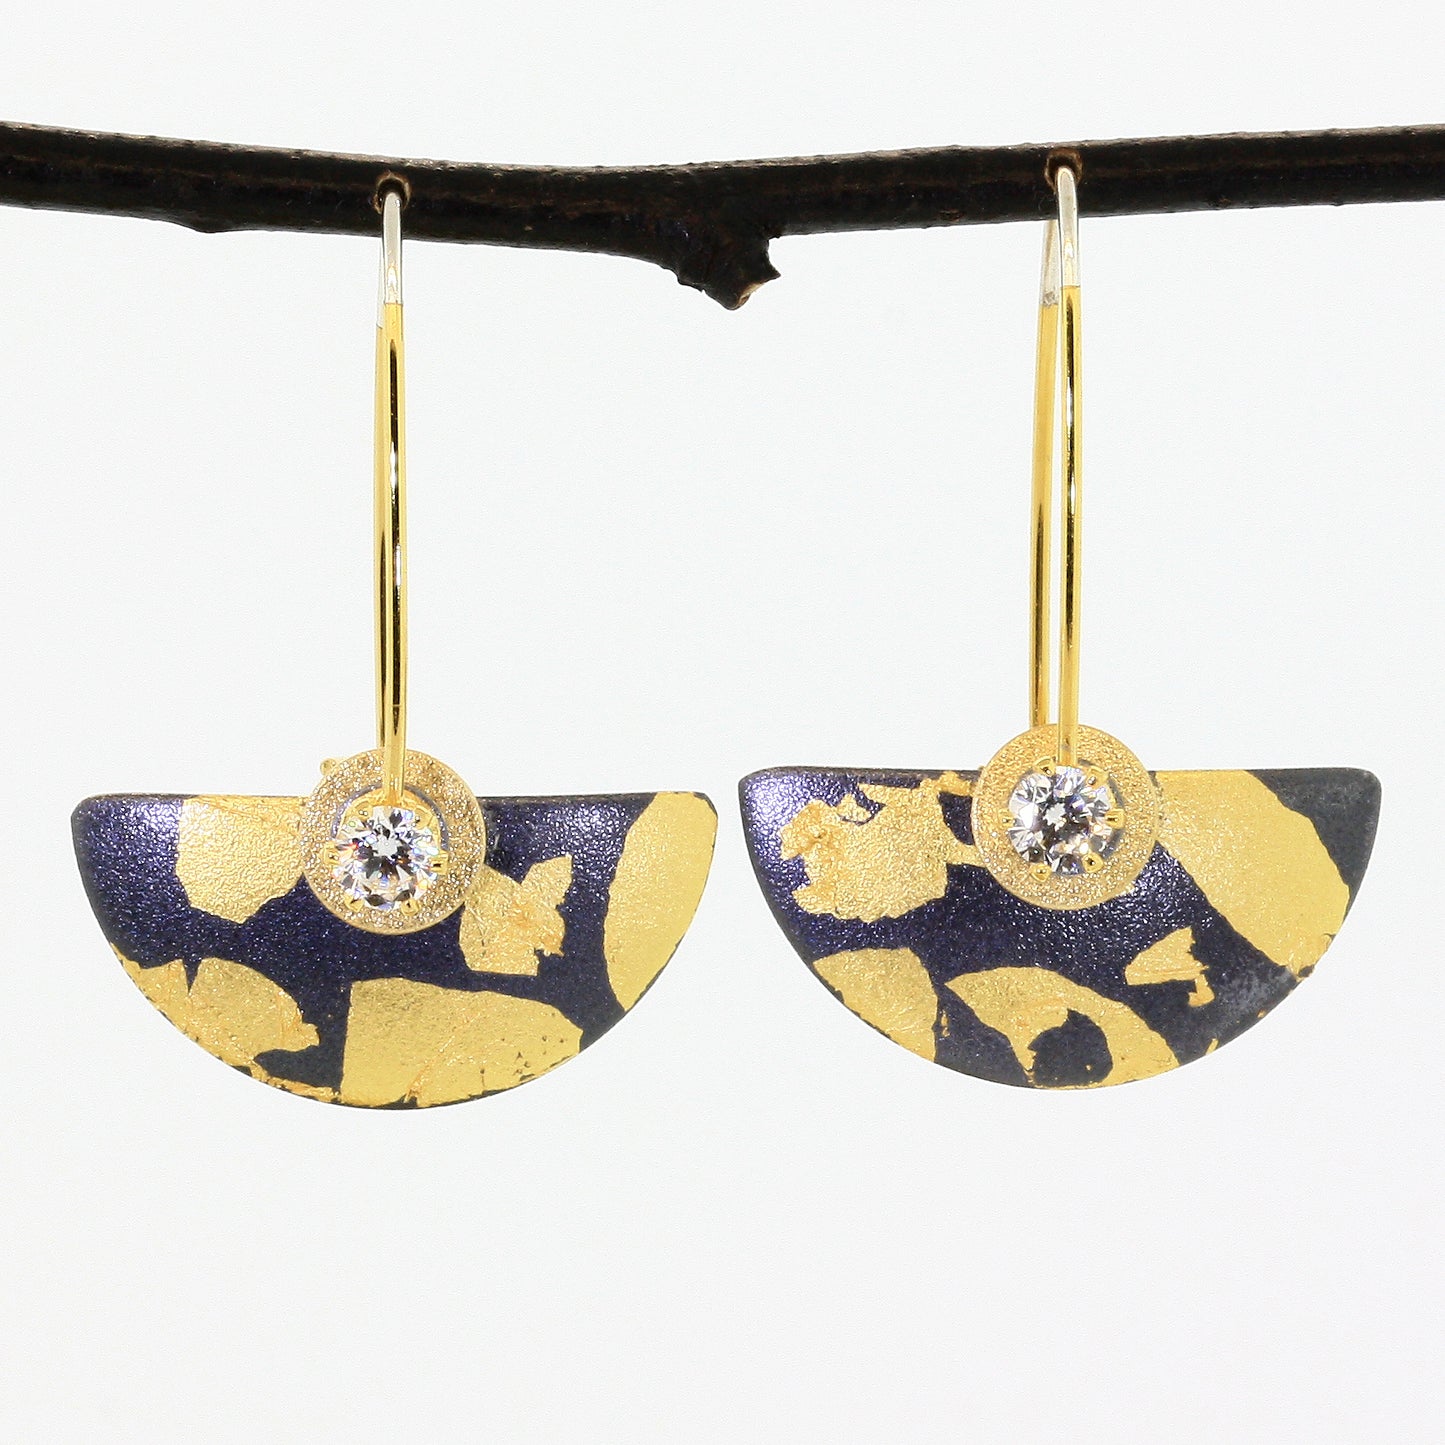 Oxidized Sterling and Goldleaf Earrings-4 Variations